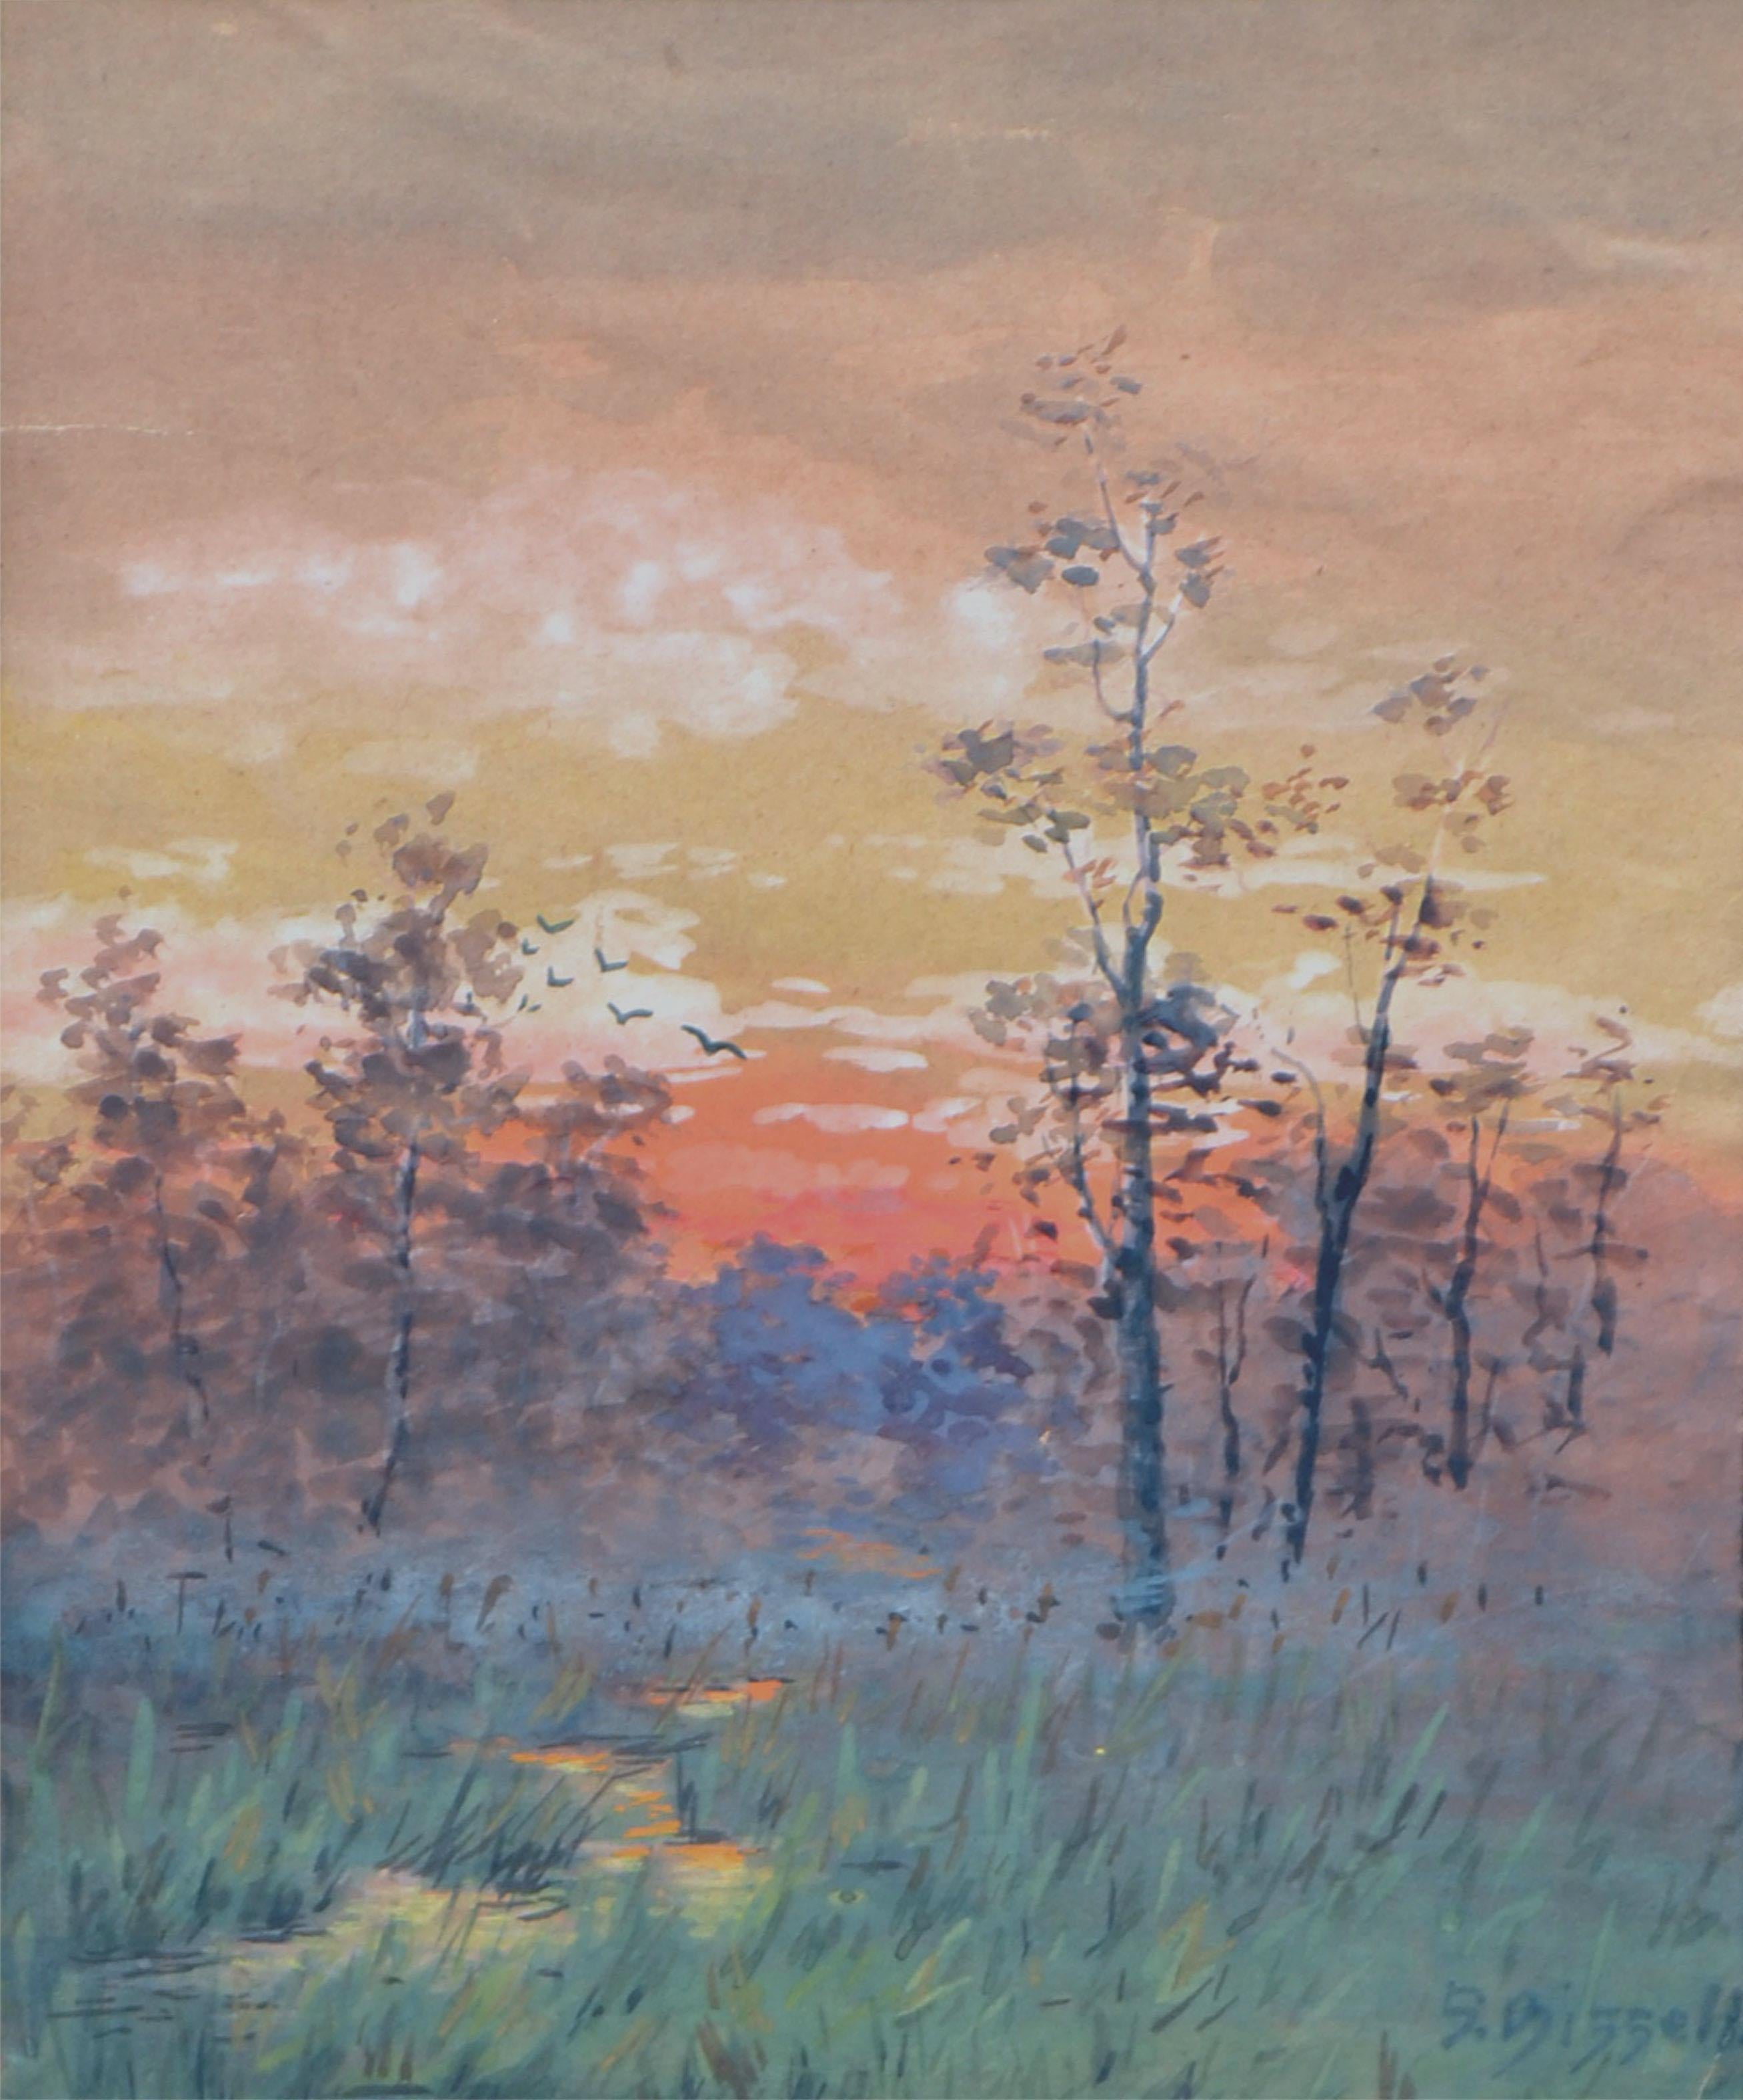 Late 19th Century Berkshire Sunrise Landscape  - Painting by Susan Field Bissell